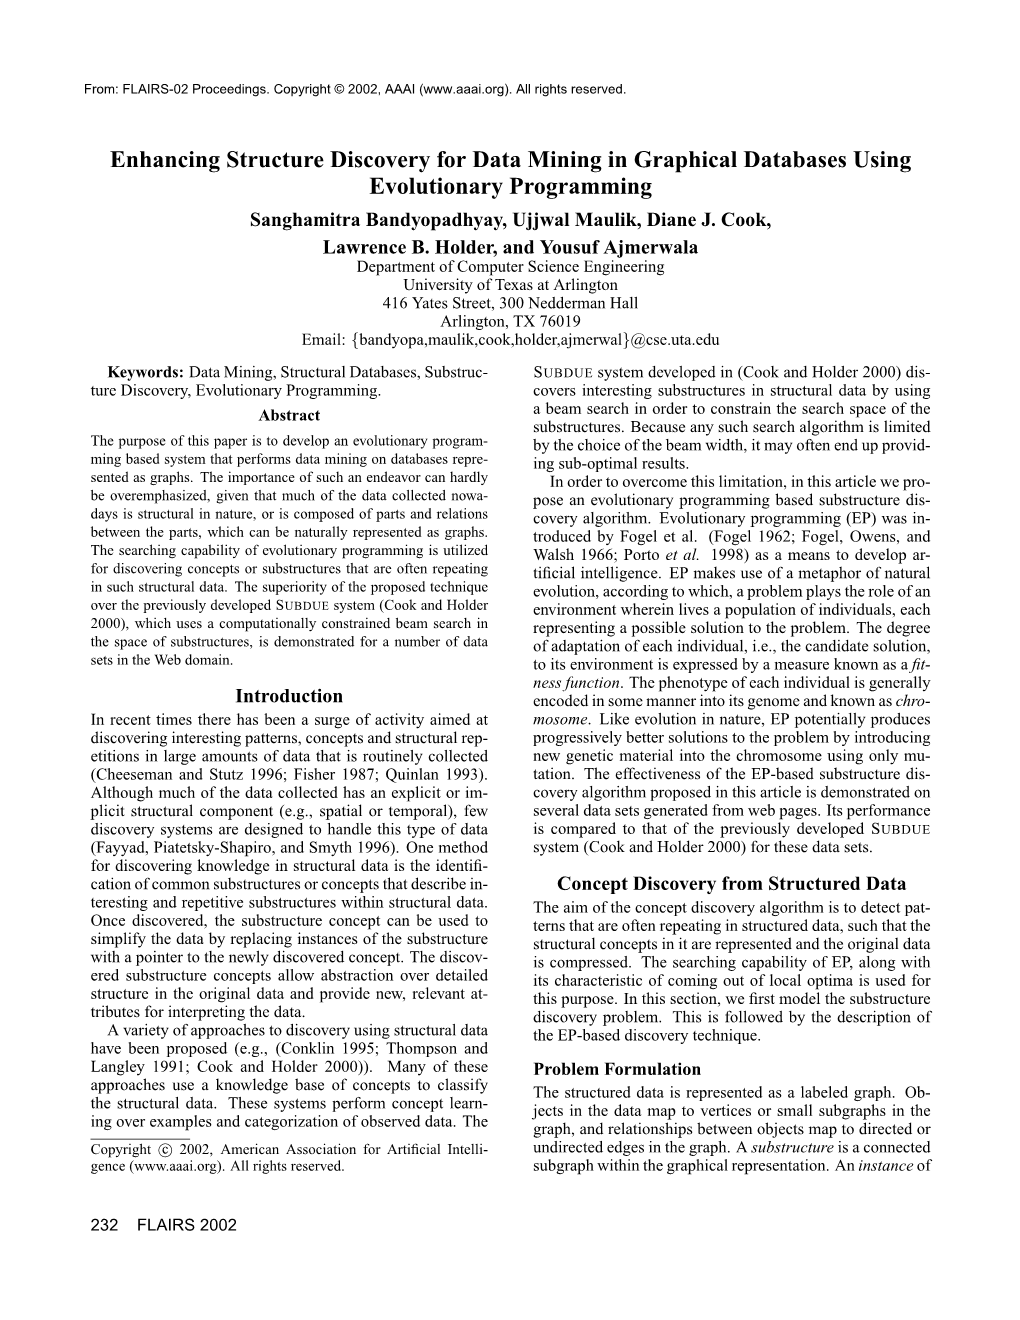 Enhancing Structure Discovery for Data Mining in Graphical Databases Using Evolutionary Programming Sanghamitra Bandyopadhyay, Ujjwal Maulik, Diane J